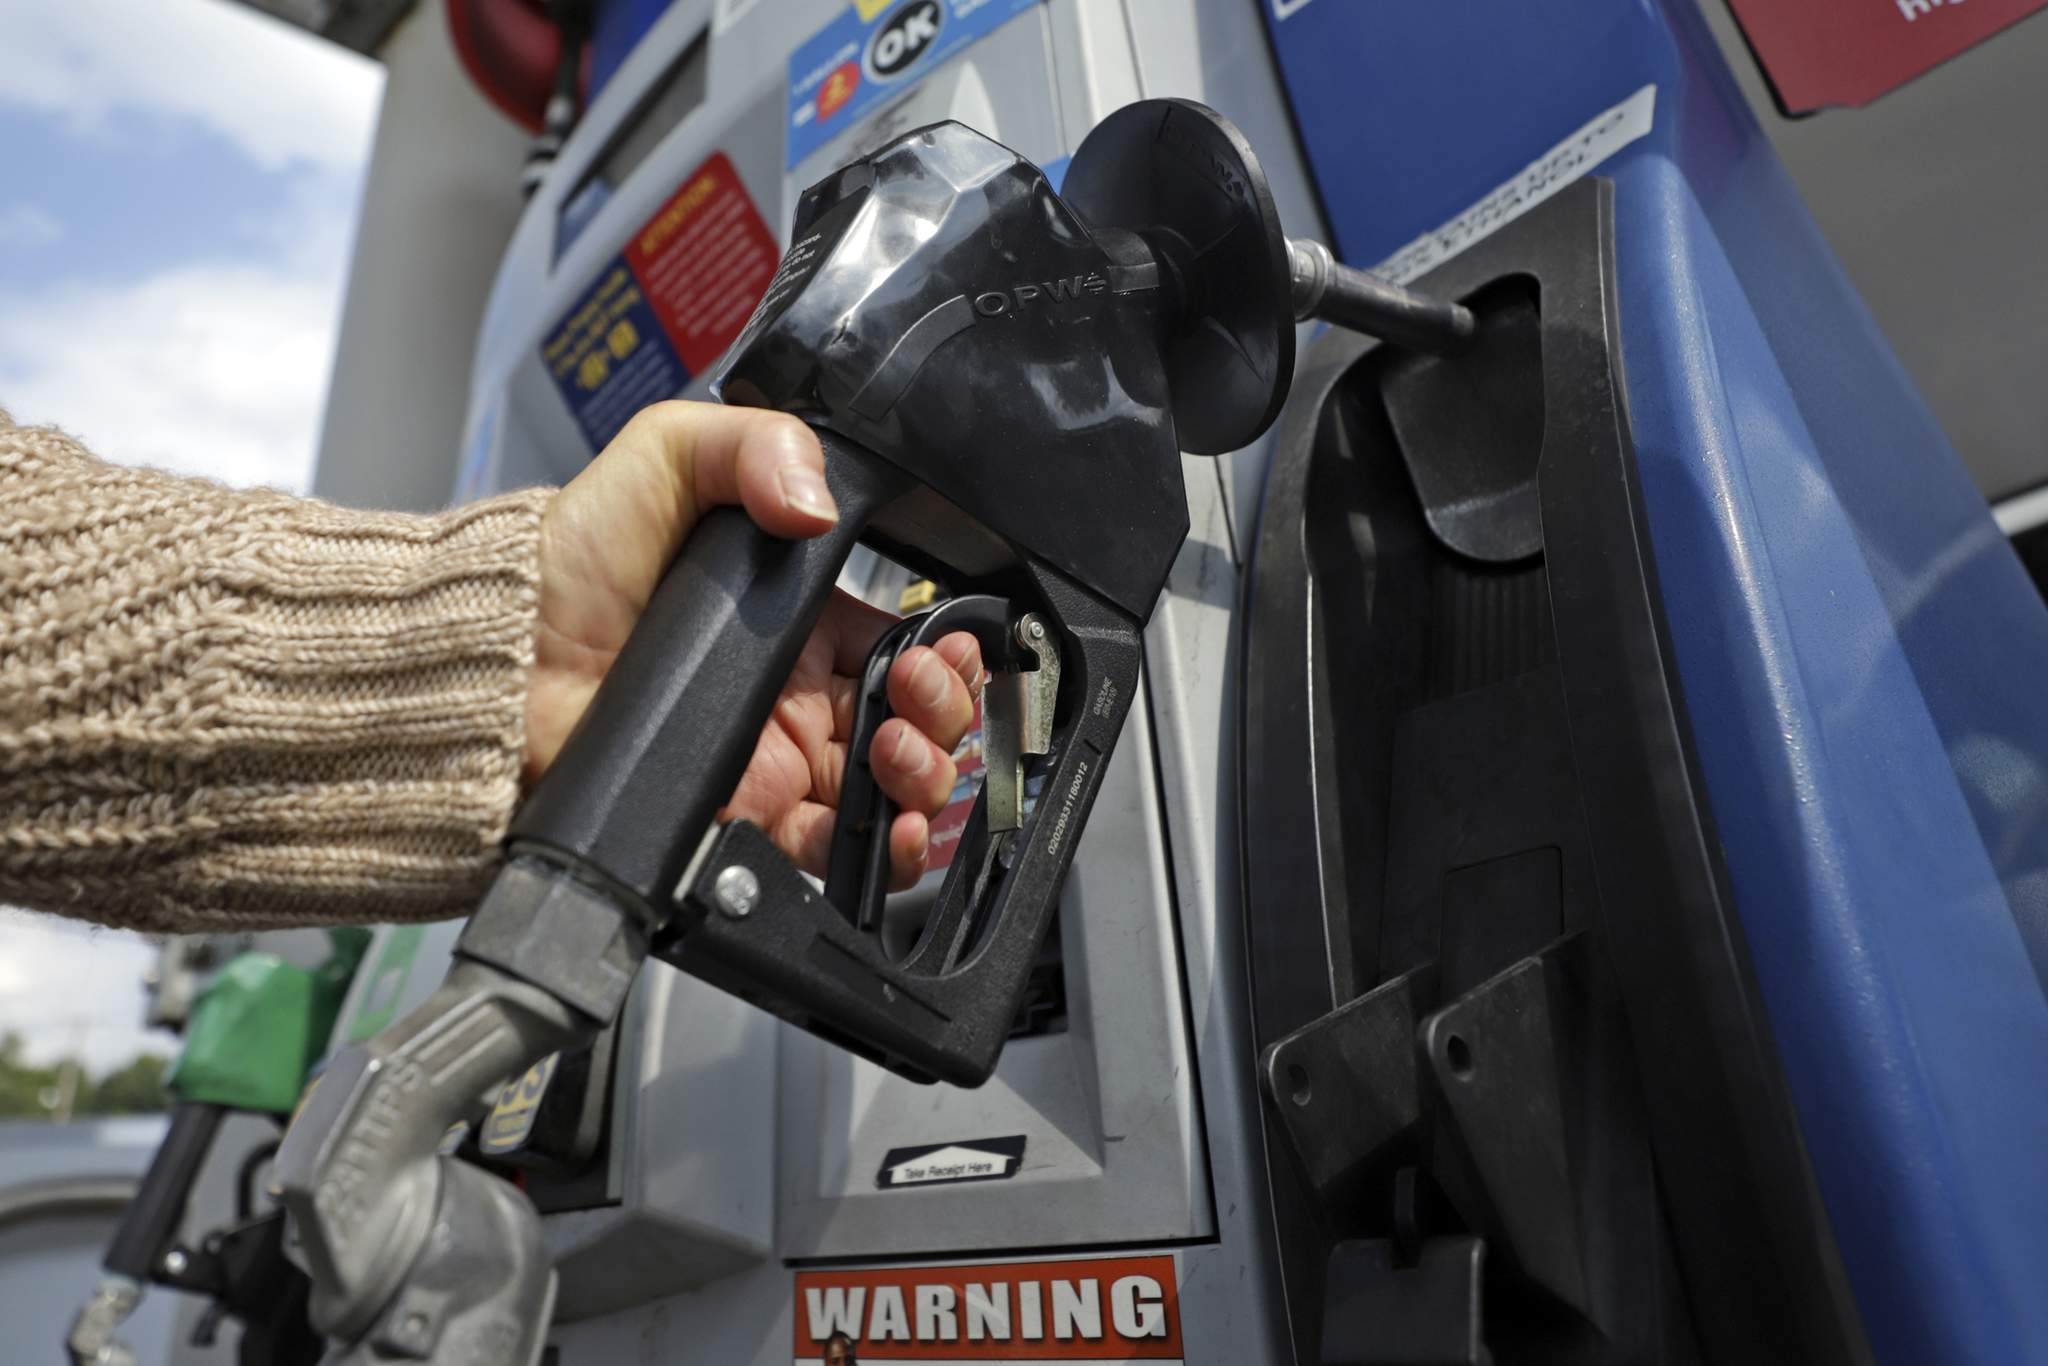 Florida paying most for gas in 3 years but expert sees ‘good news’ coming